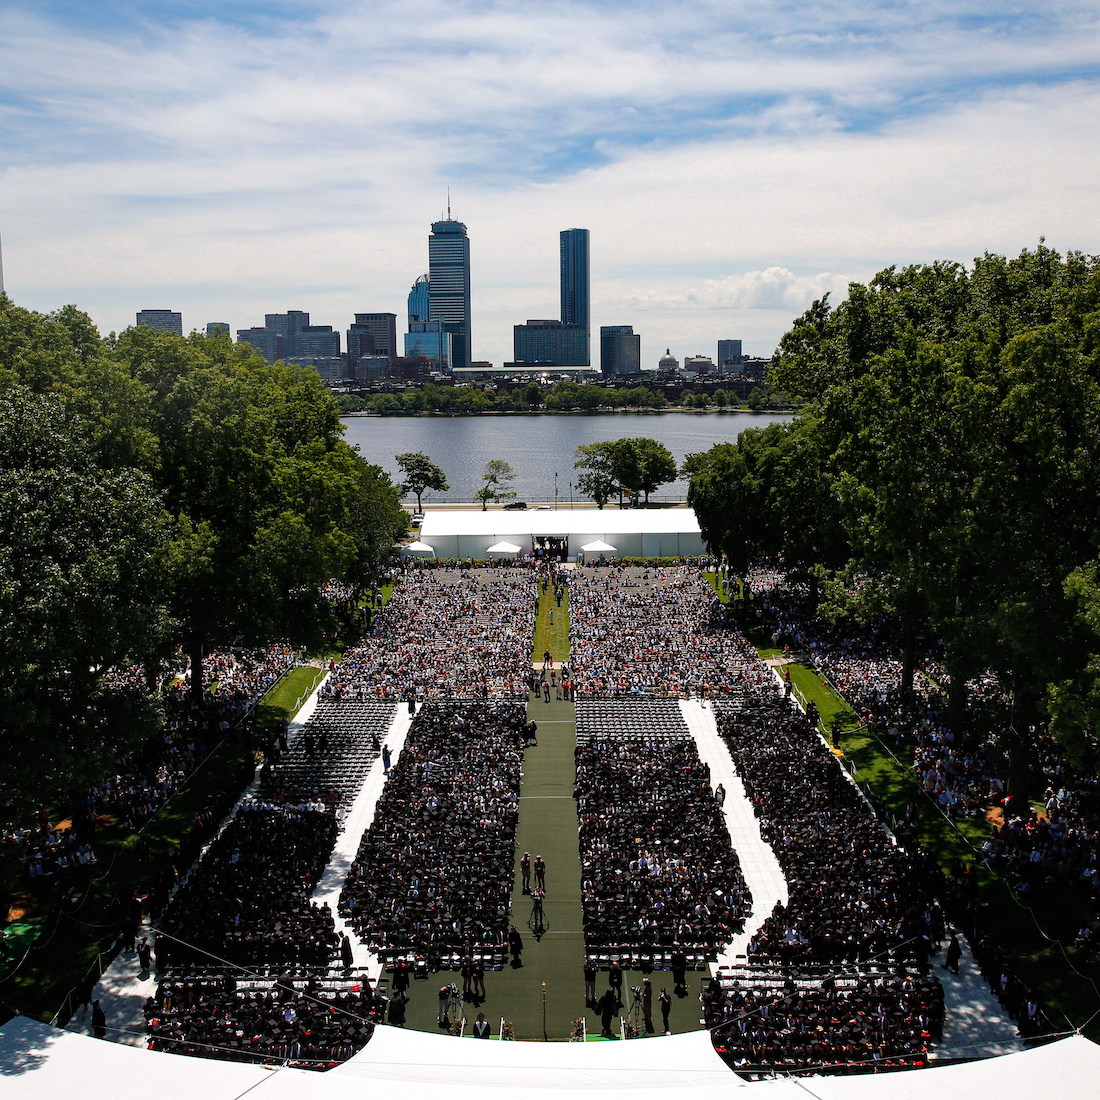 Image of Killian Court during Commencement